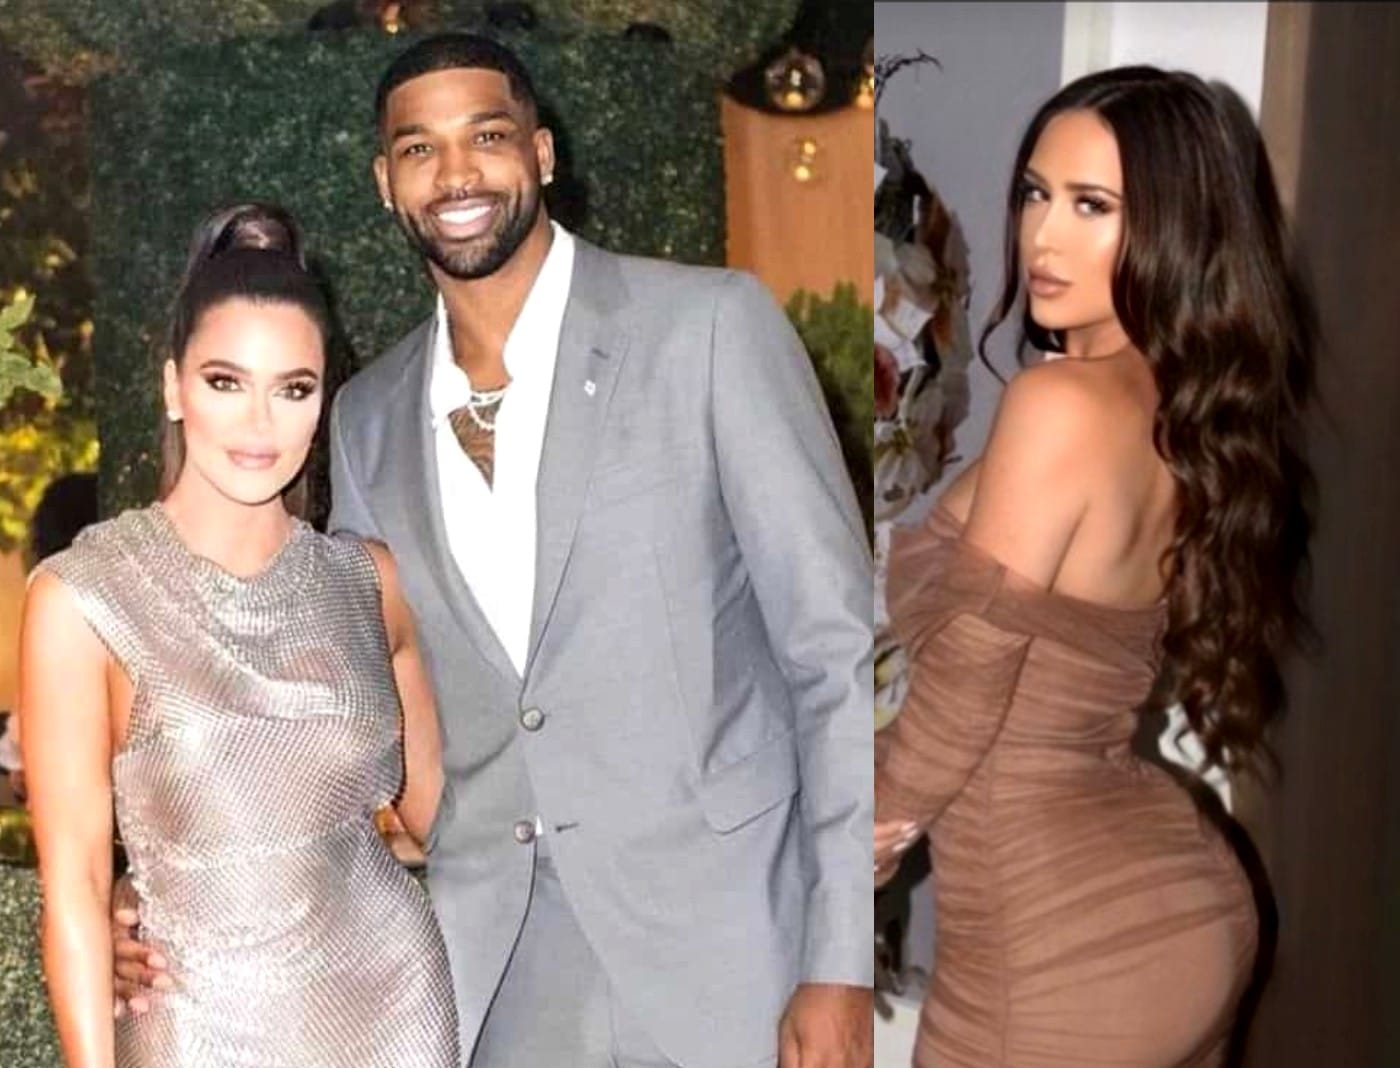 Tristan Thompson to Pay Maralee Nichols $9500 in Child Support as They Reach Agreement Amid Paternity Lawsuit Over Son 